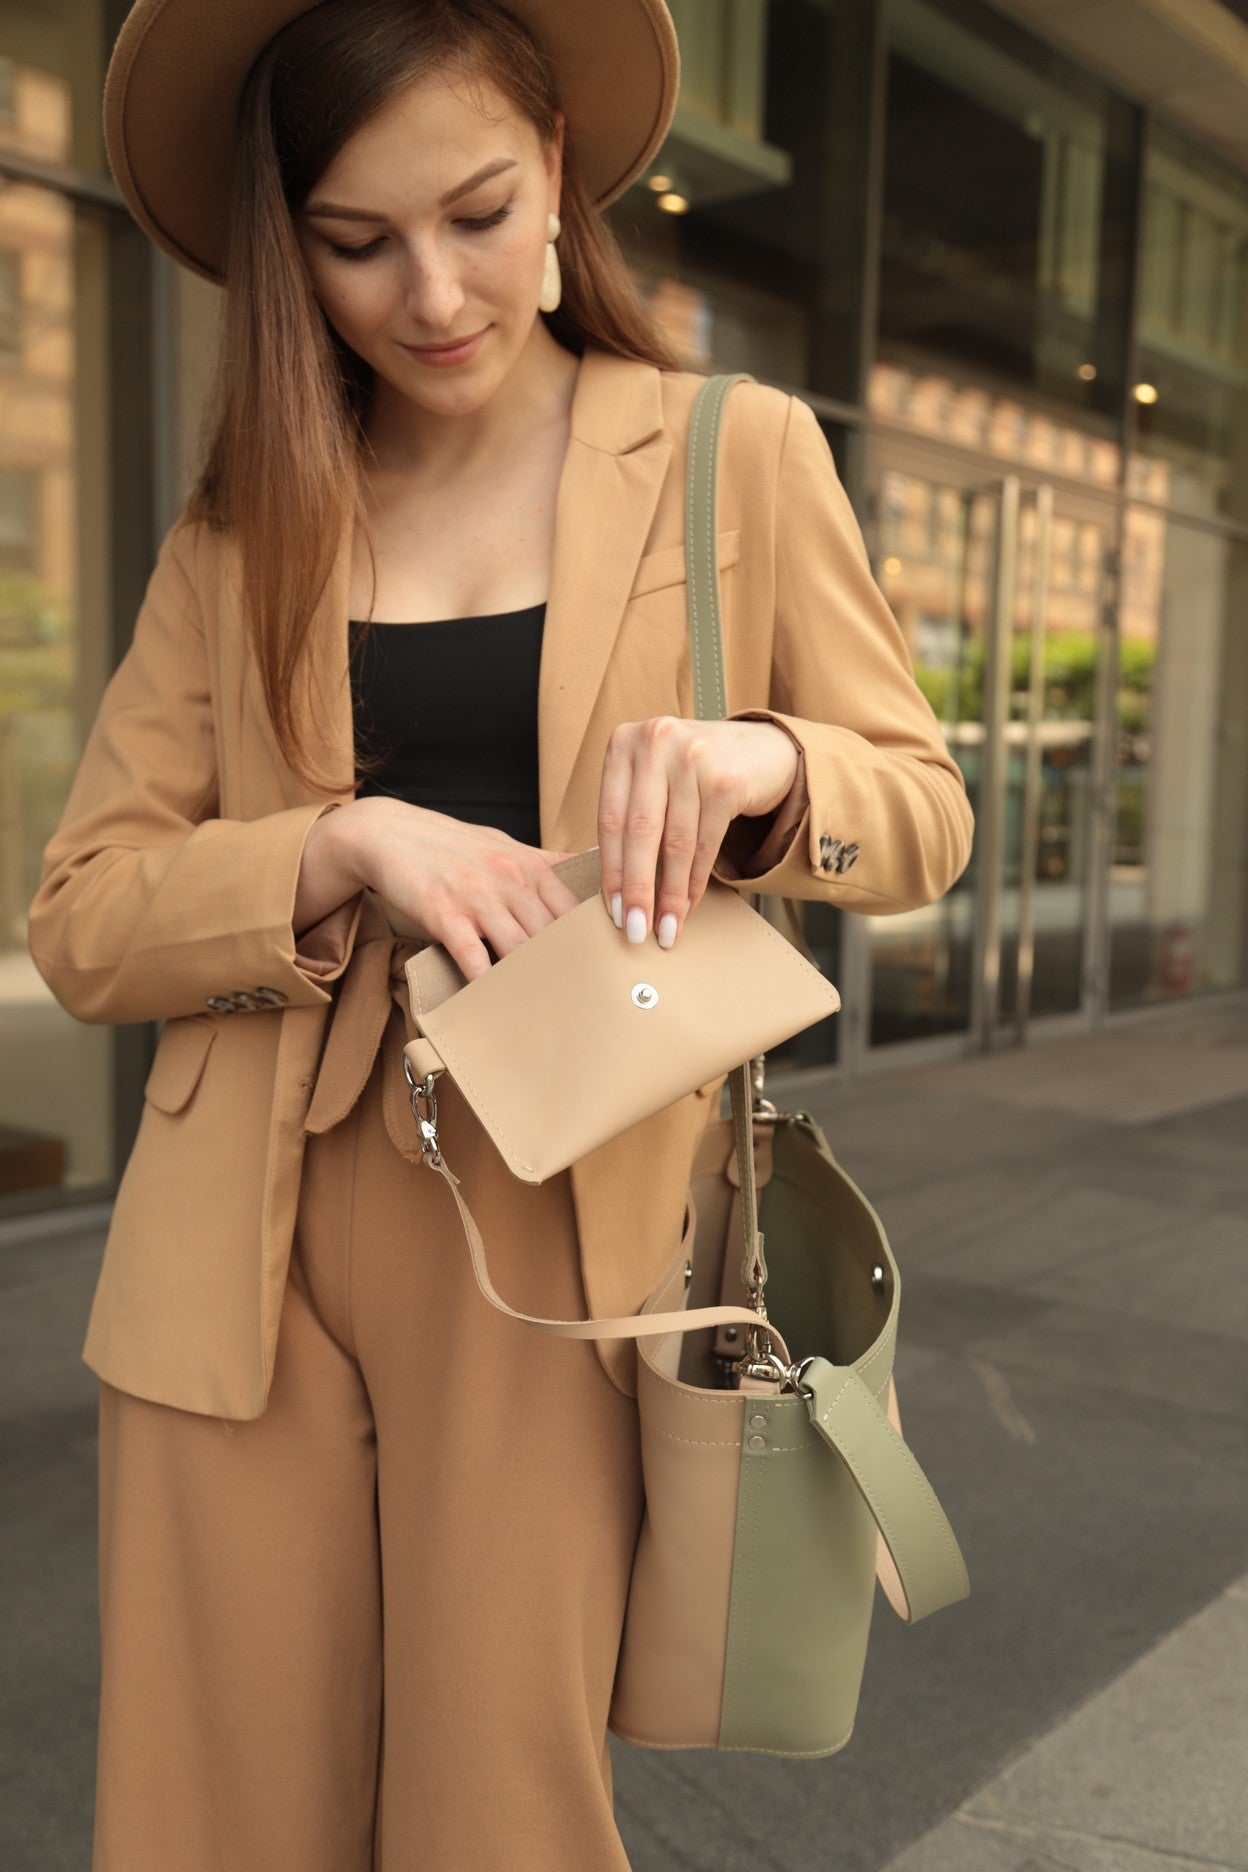 women's leather bag beige and olive with a purse